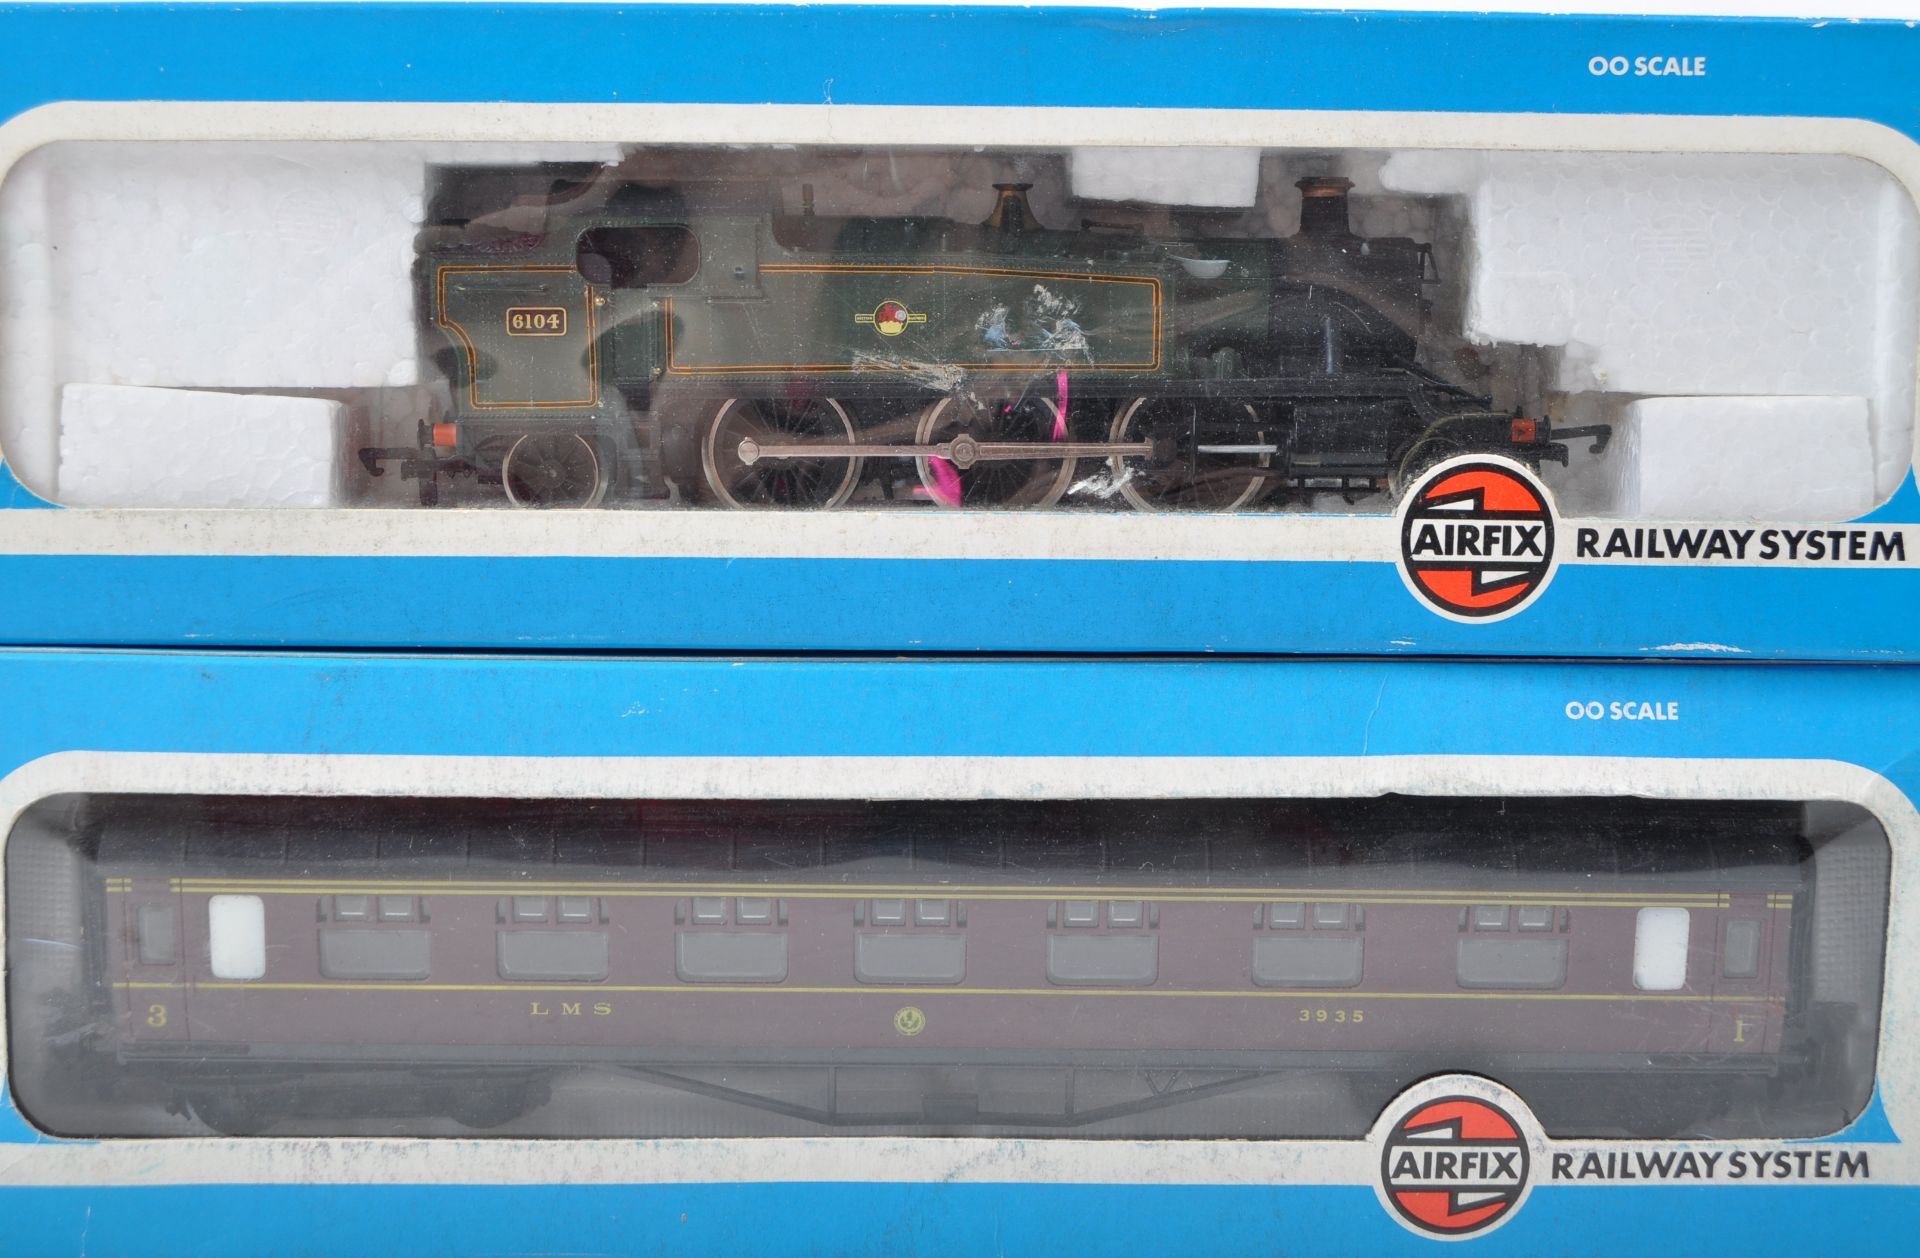 COLLECTION OF X4 AIRIX 00 GAUGE TRAINSET LOCO AND CARRIAGES - Image 5 of 5